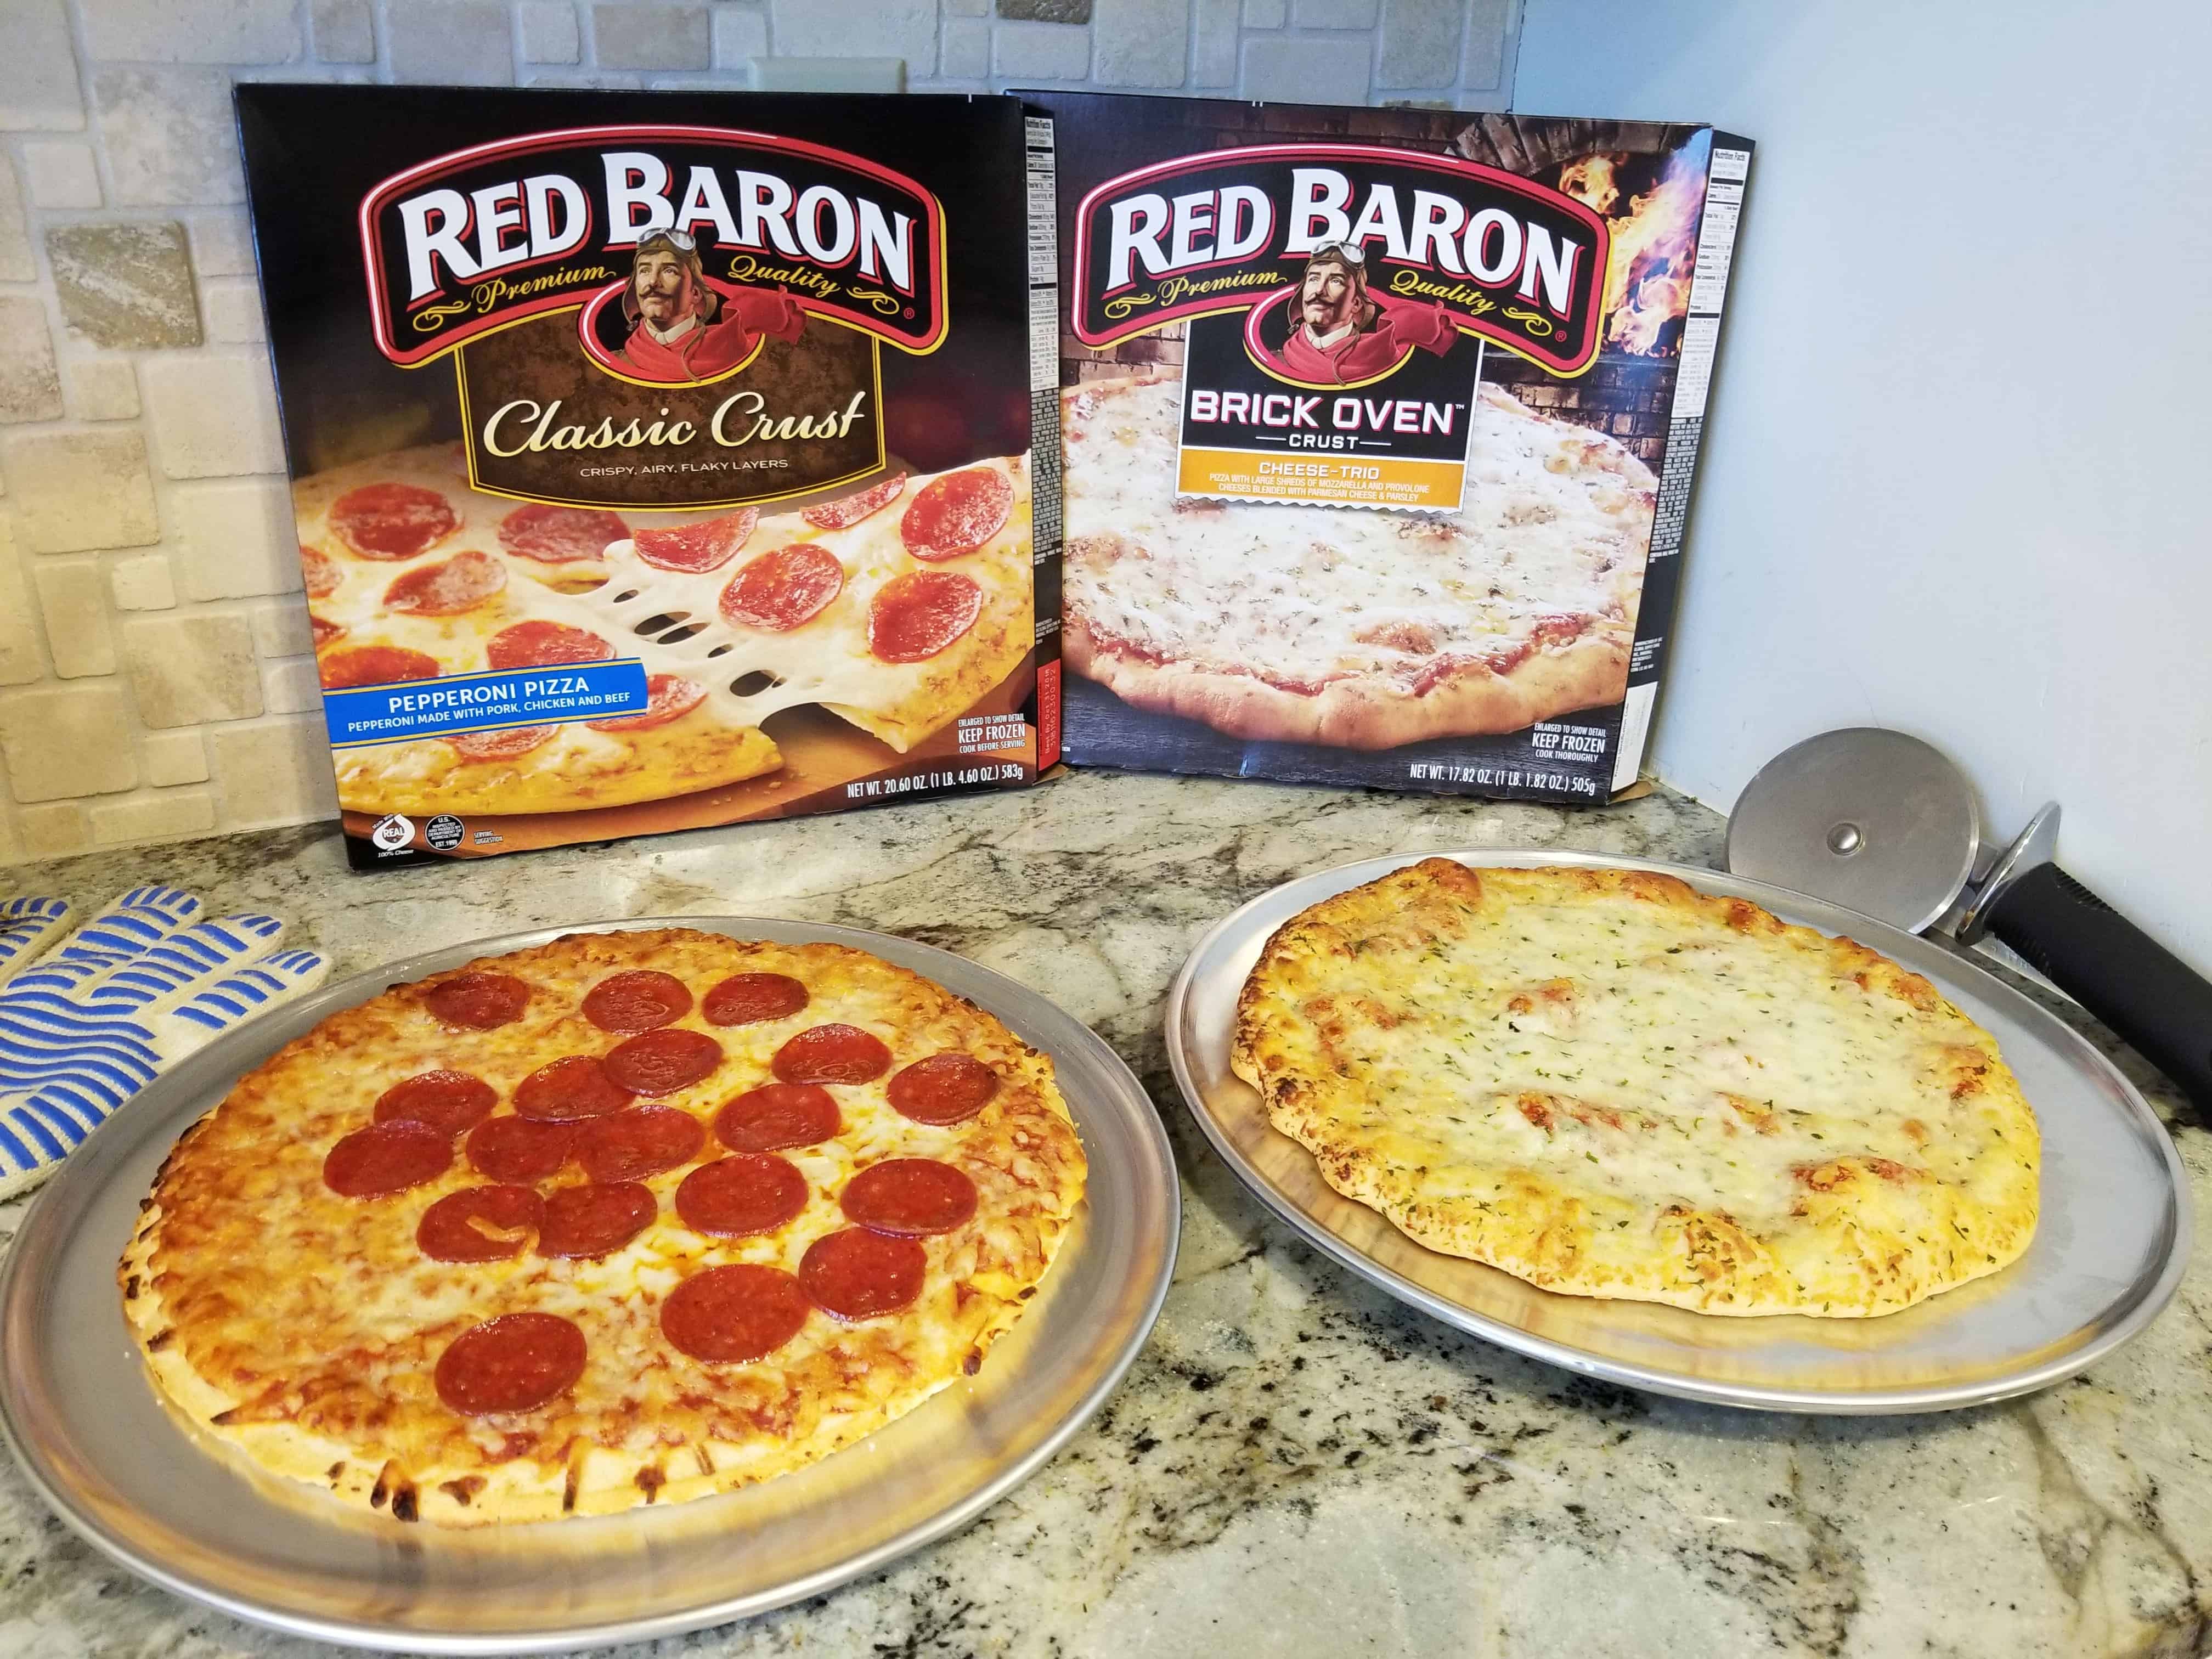 With so many flavors, pizza is easily a family favorite and makes everyone happy. Check out Red Baron pizza and more simple tips for reducing summer chaos at Made In A Pinch. Red Baron boxes with cooked pizzas.